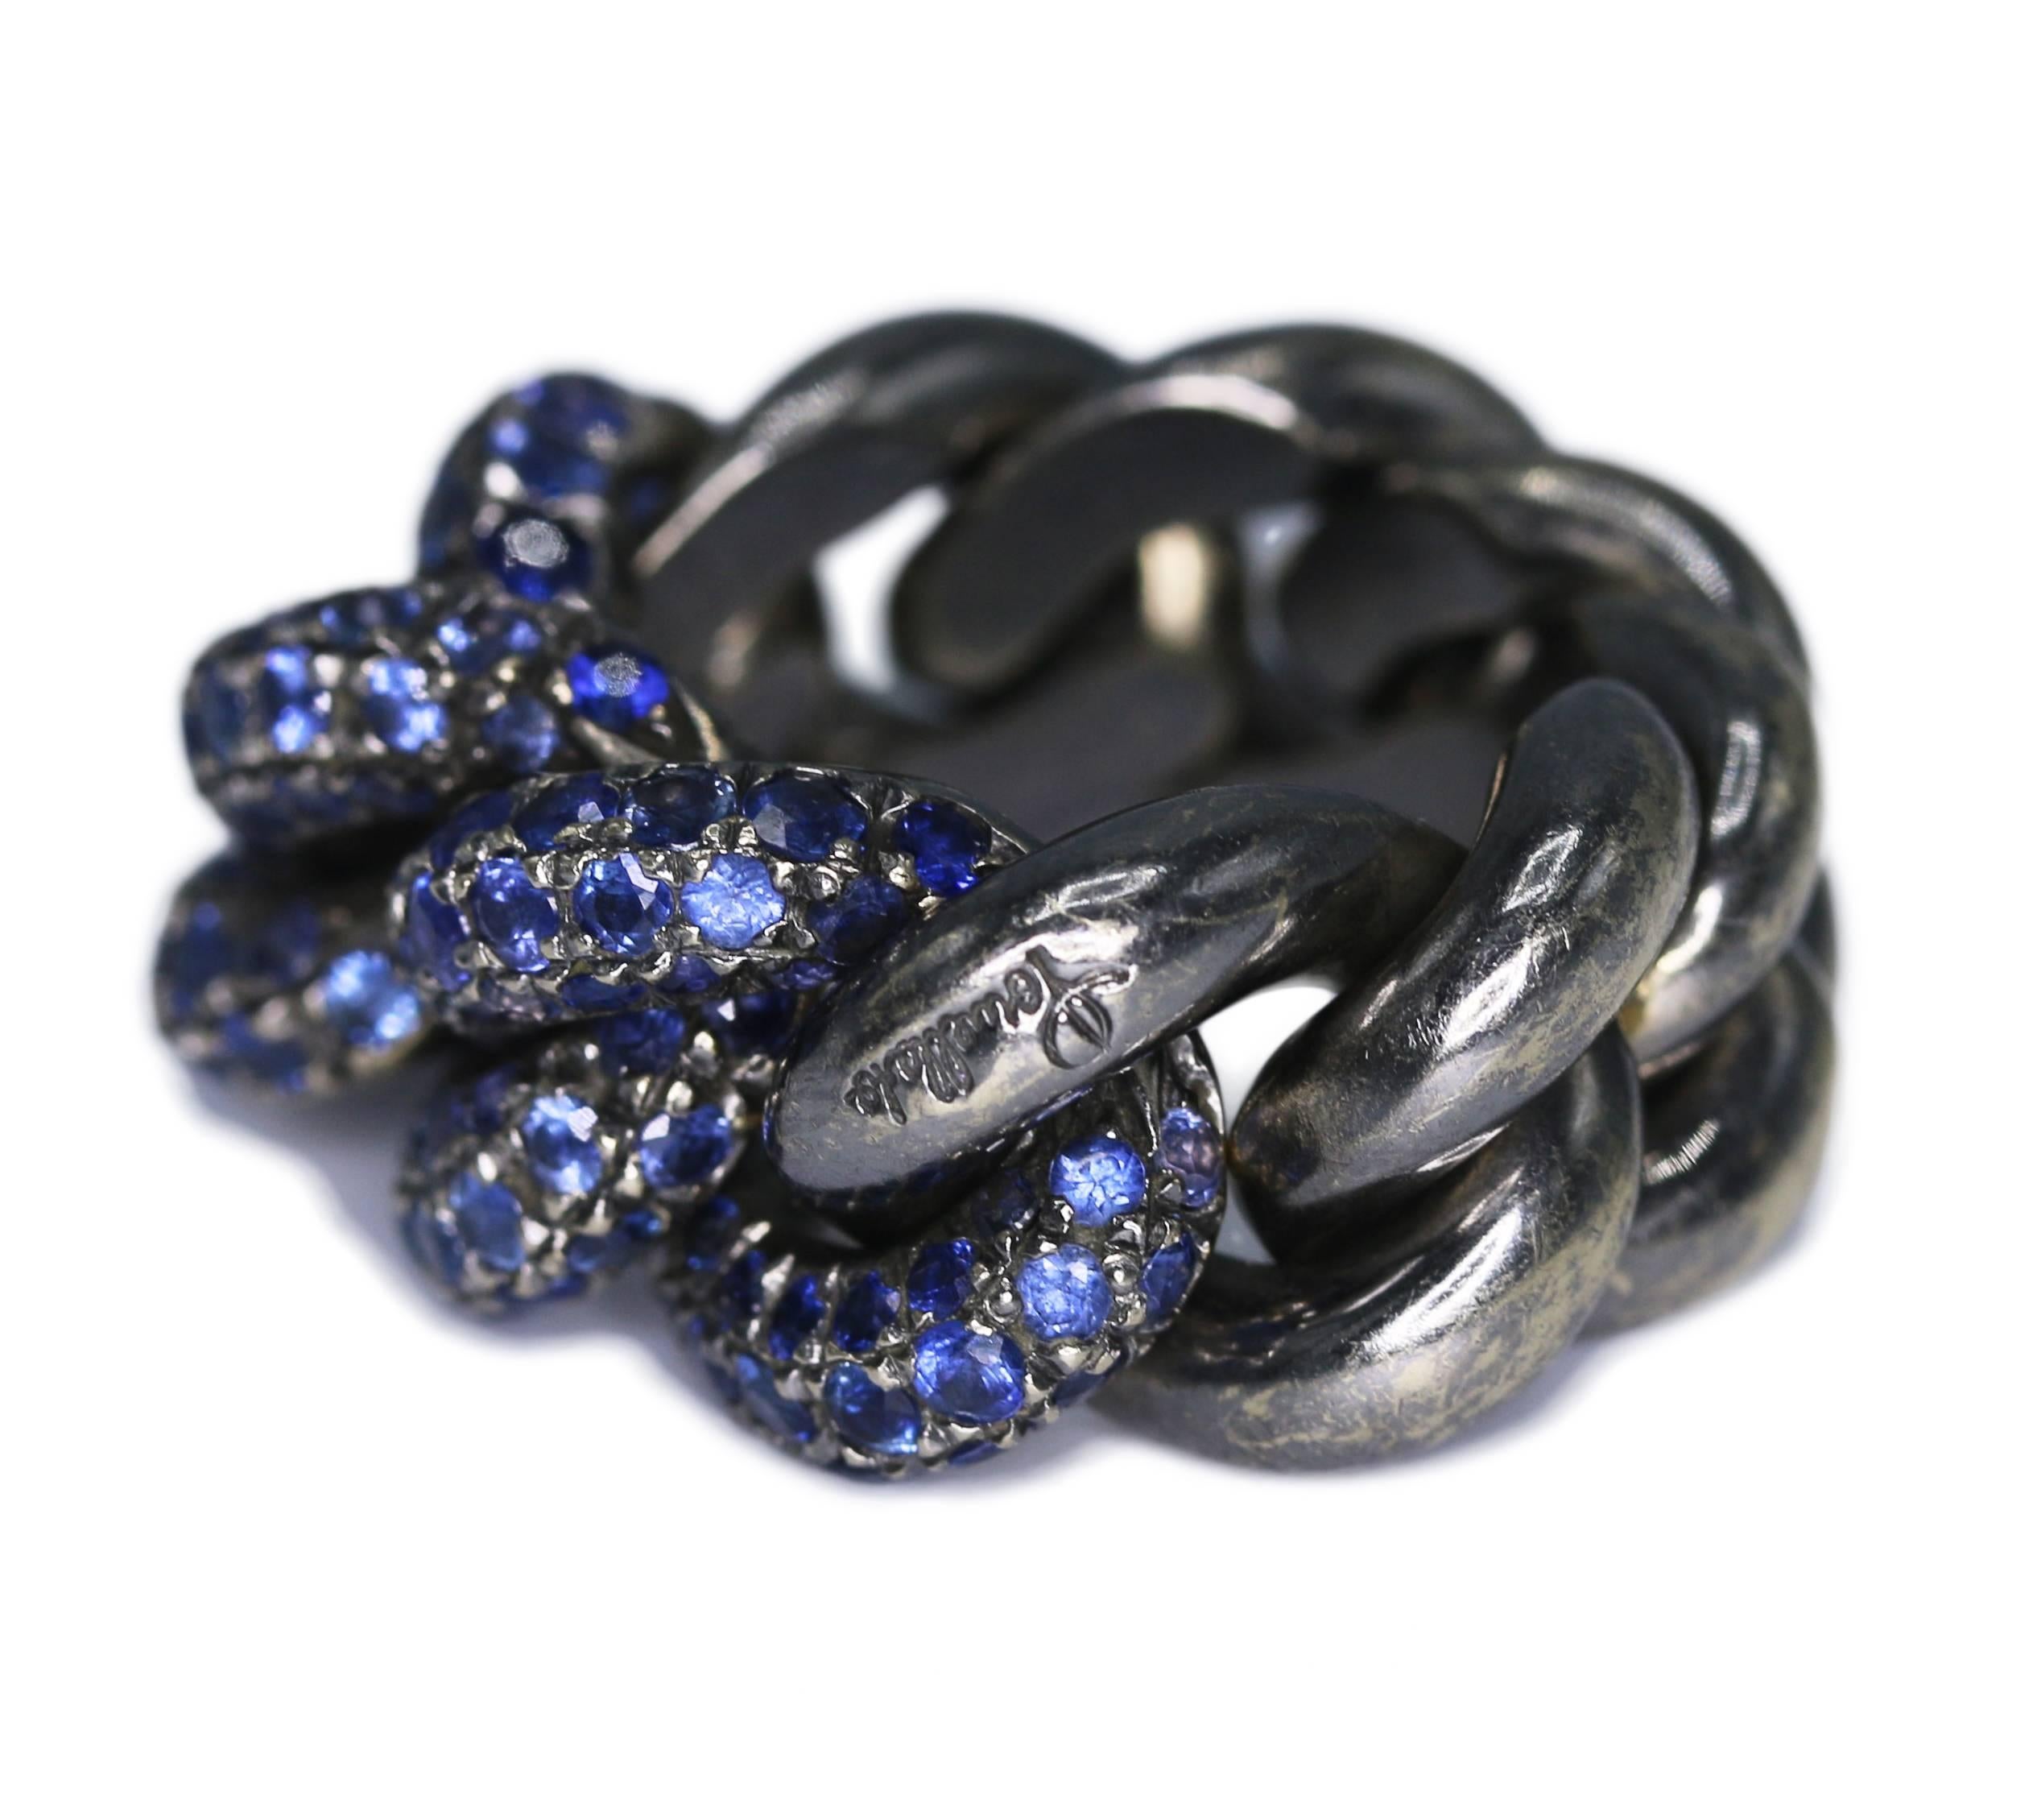 18 karat blackened gold and sapphire ring by Pomellato, designed as an interlocking chain of blackened gold, set at the front with round sapphires, gross weight 24.4 grams, size 6, measuring 1 by 1 by 1/2 inch, signed Pomellato. This ring is quite